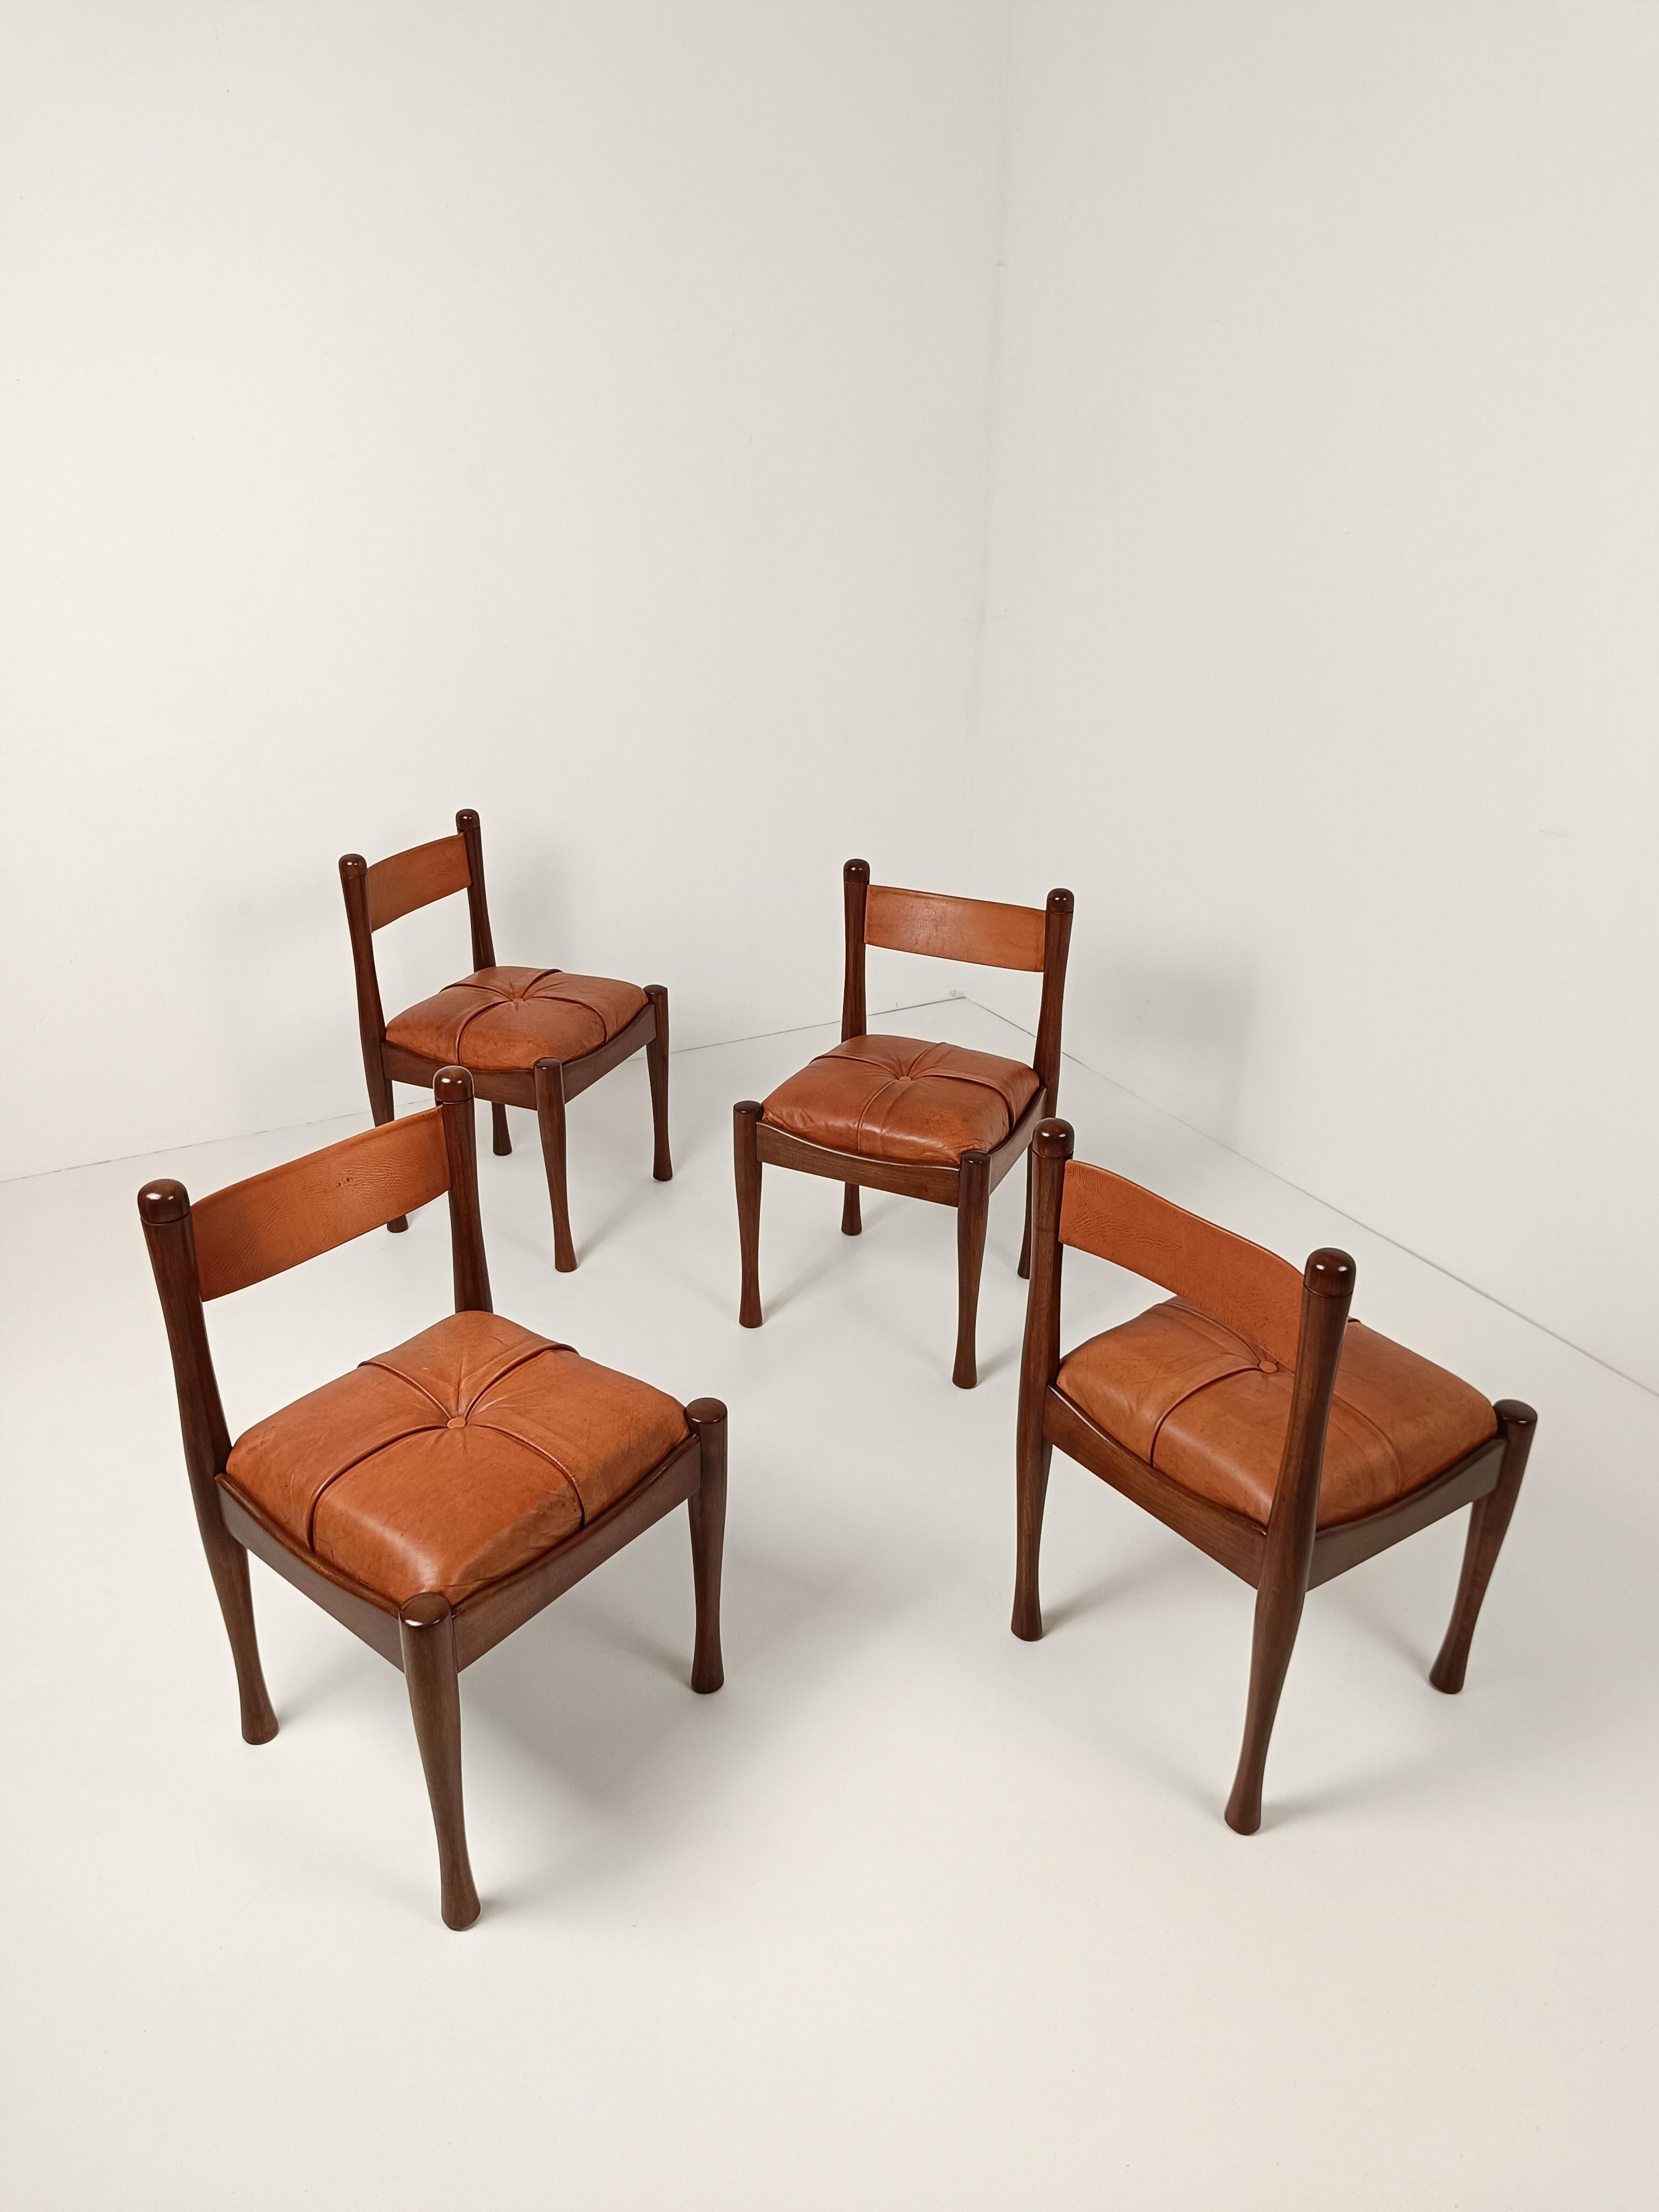 I propose to you a set consisting of 4 model 620 chairs designed in the mid-60s by Silvio Coppola for the historic luxury furniture brand Bernini.
This chair fully represents the style for which Bernini production is known throughout the world and